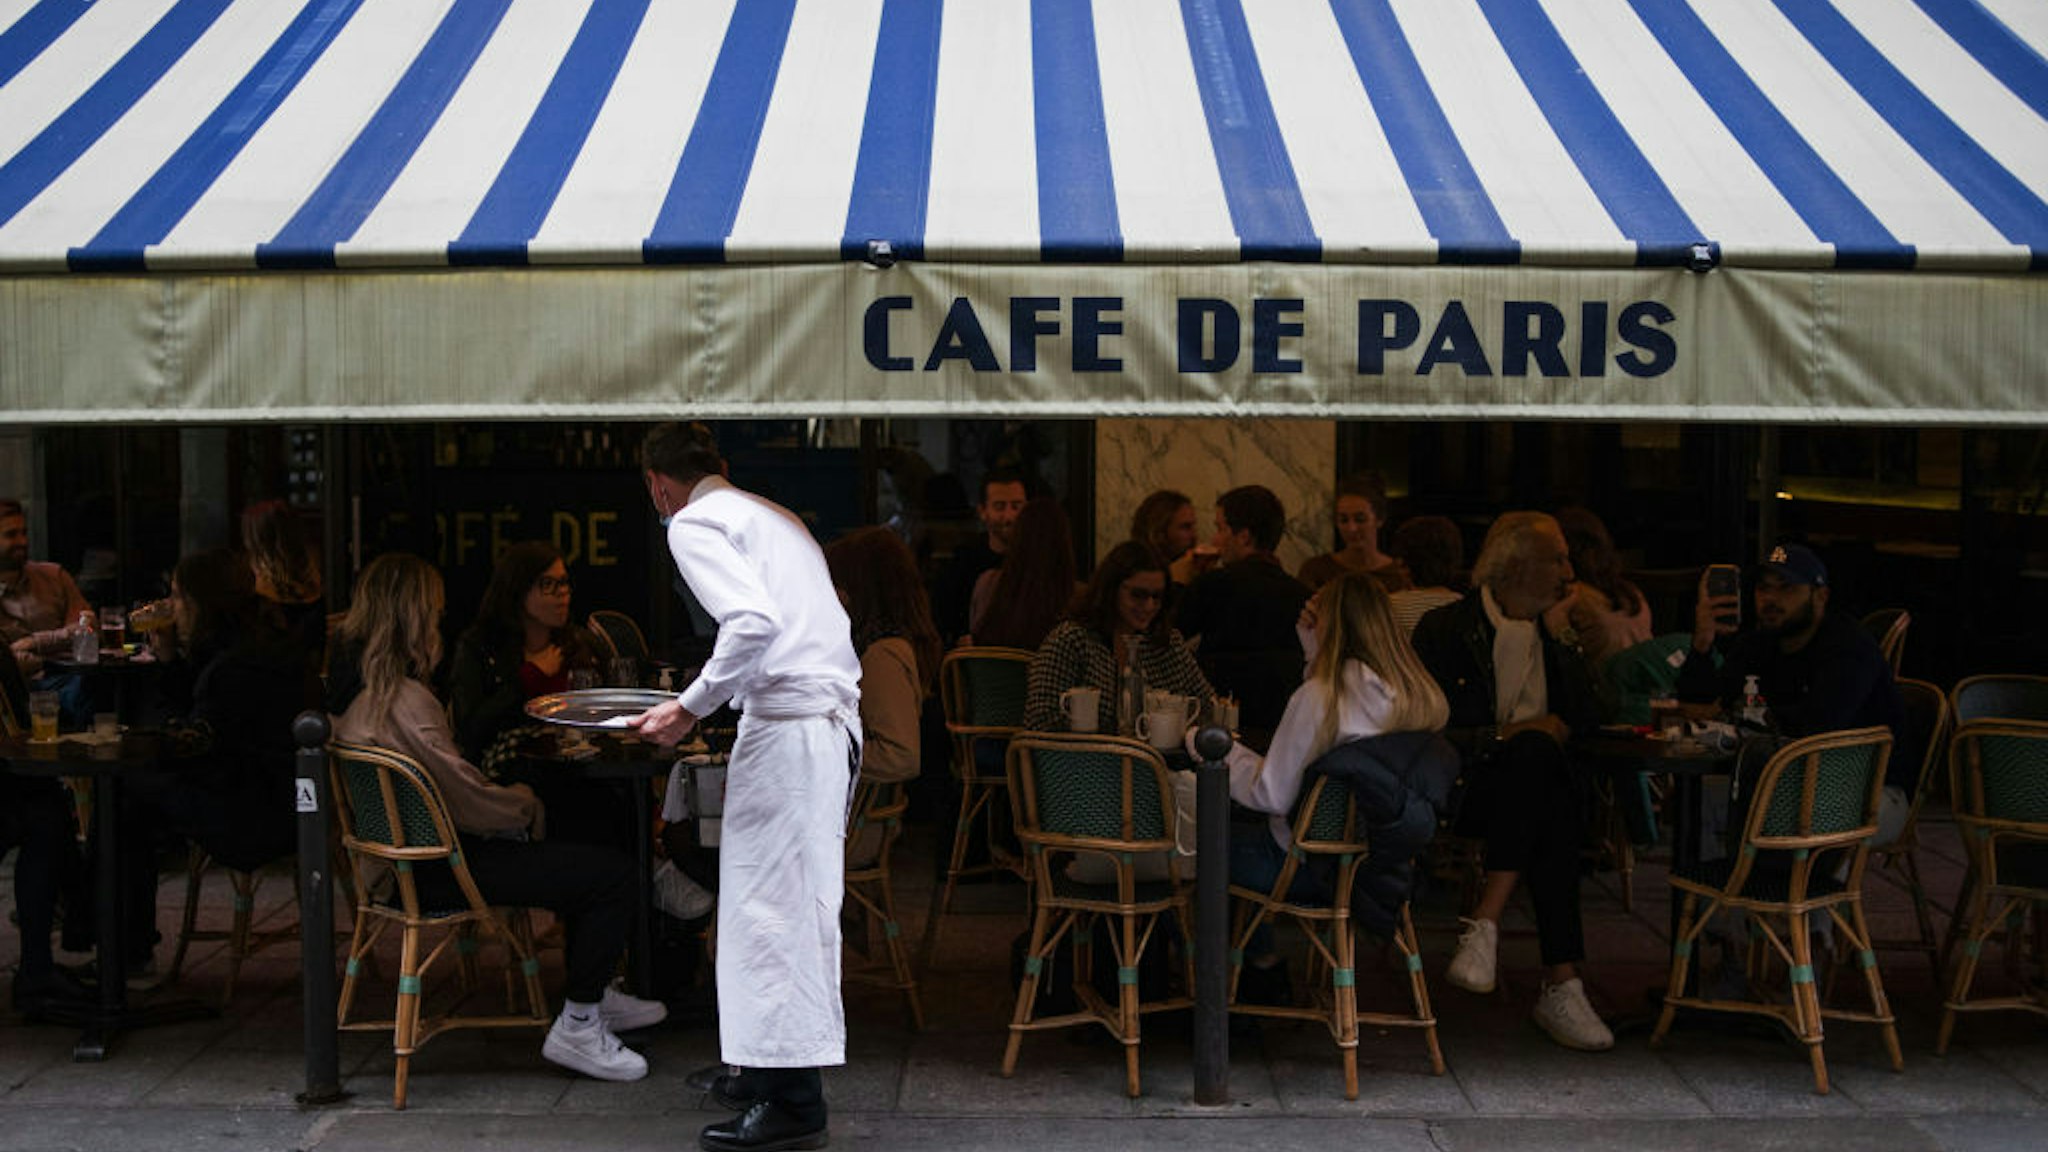 A waiter serves customers eating and drinking on the terrace area outside Cafe de Paris, ahead of the enforcement of new Covid-19 restrictions which will see bars and restaurants closing early, in Paris, France, on Monday, Sept. 28, 2020. President Emmanuel Macrons government is seeking to ease tension after the first significant tightening of restrictions on French daily life since the end of the lockdown in May. Photographer: Nathan Laine/Bloomberg via Getty Images